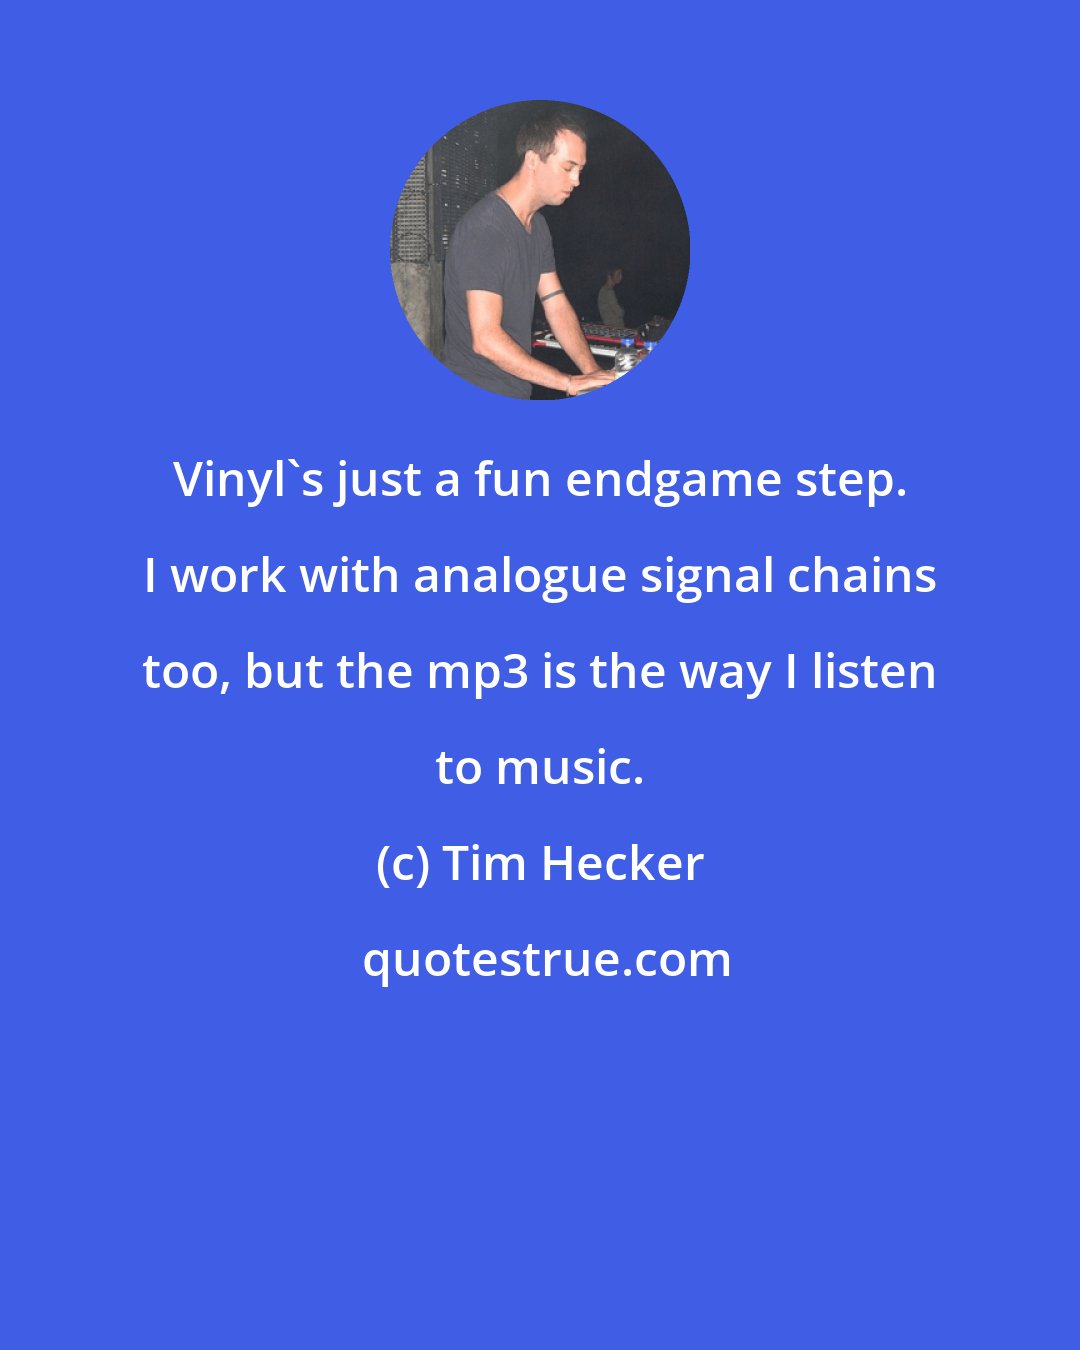 Tim Hecker: Vinyl's just a fun endgame step. I work with analogue signal chains too, but the mp3 is the way I listen to music.